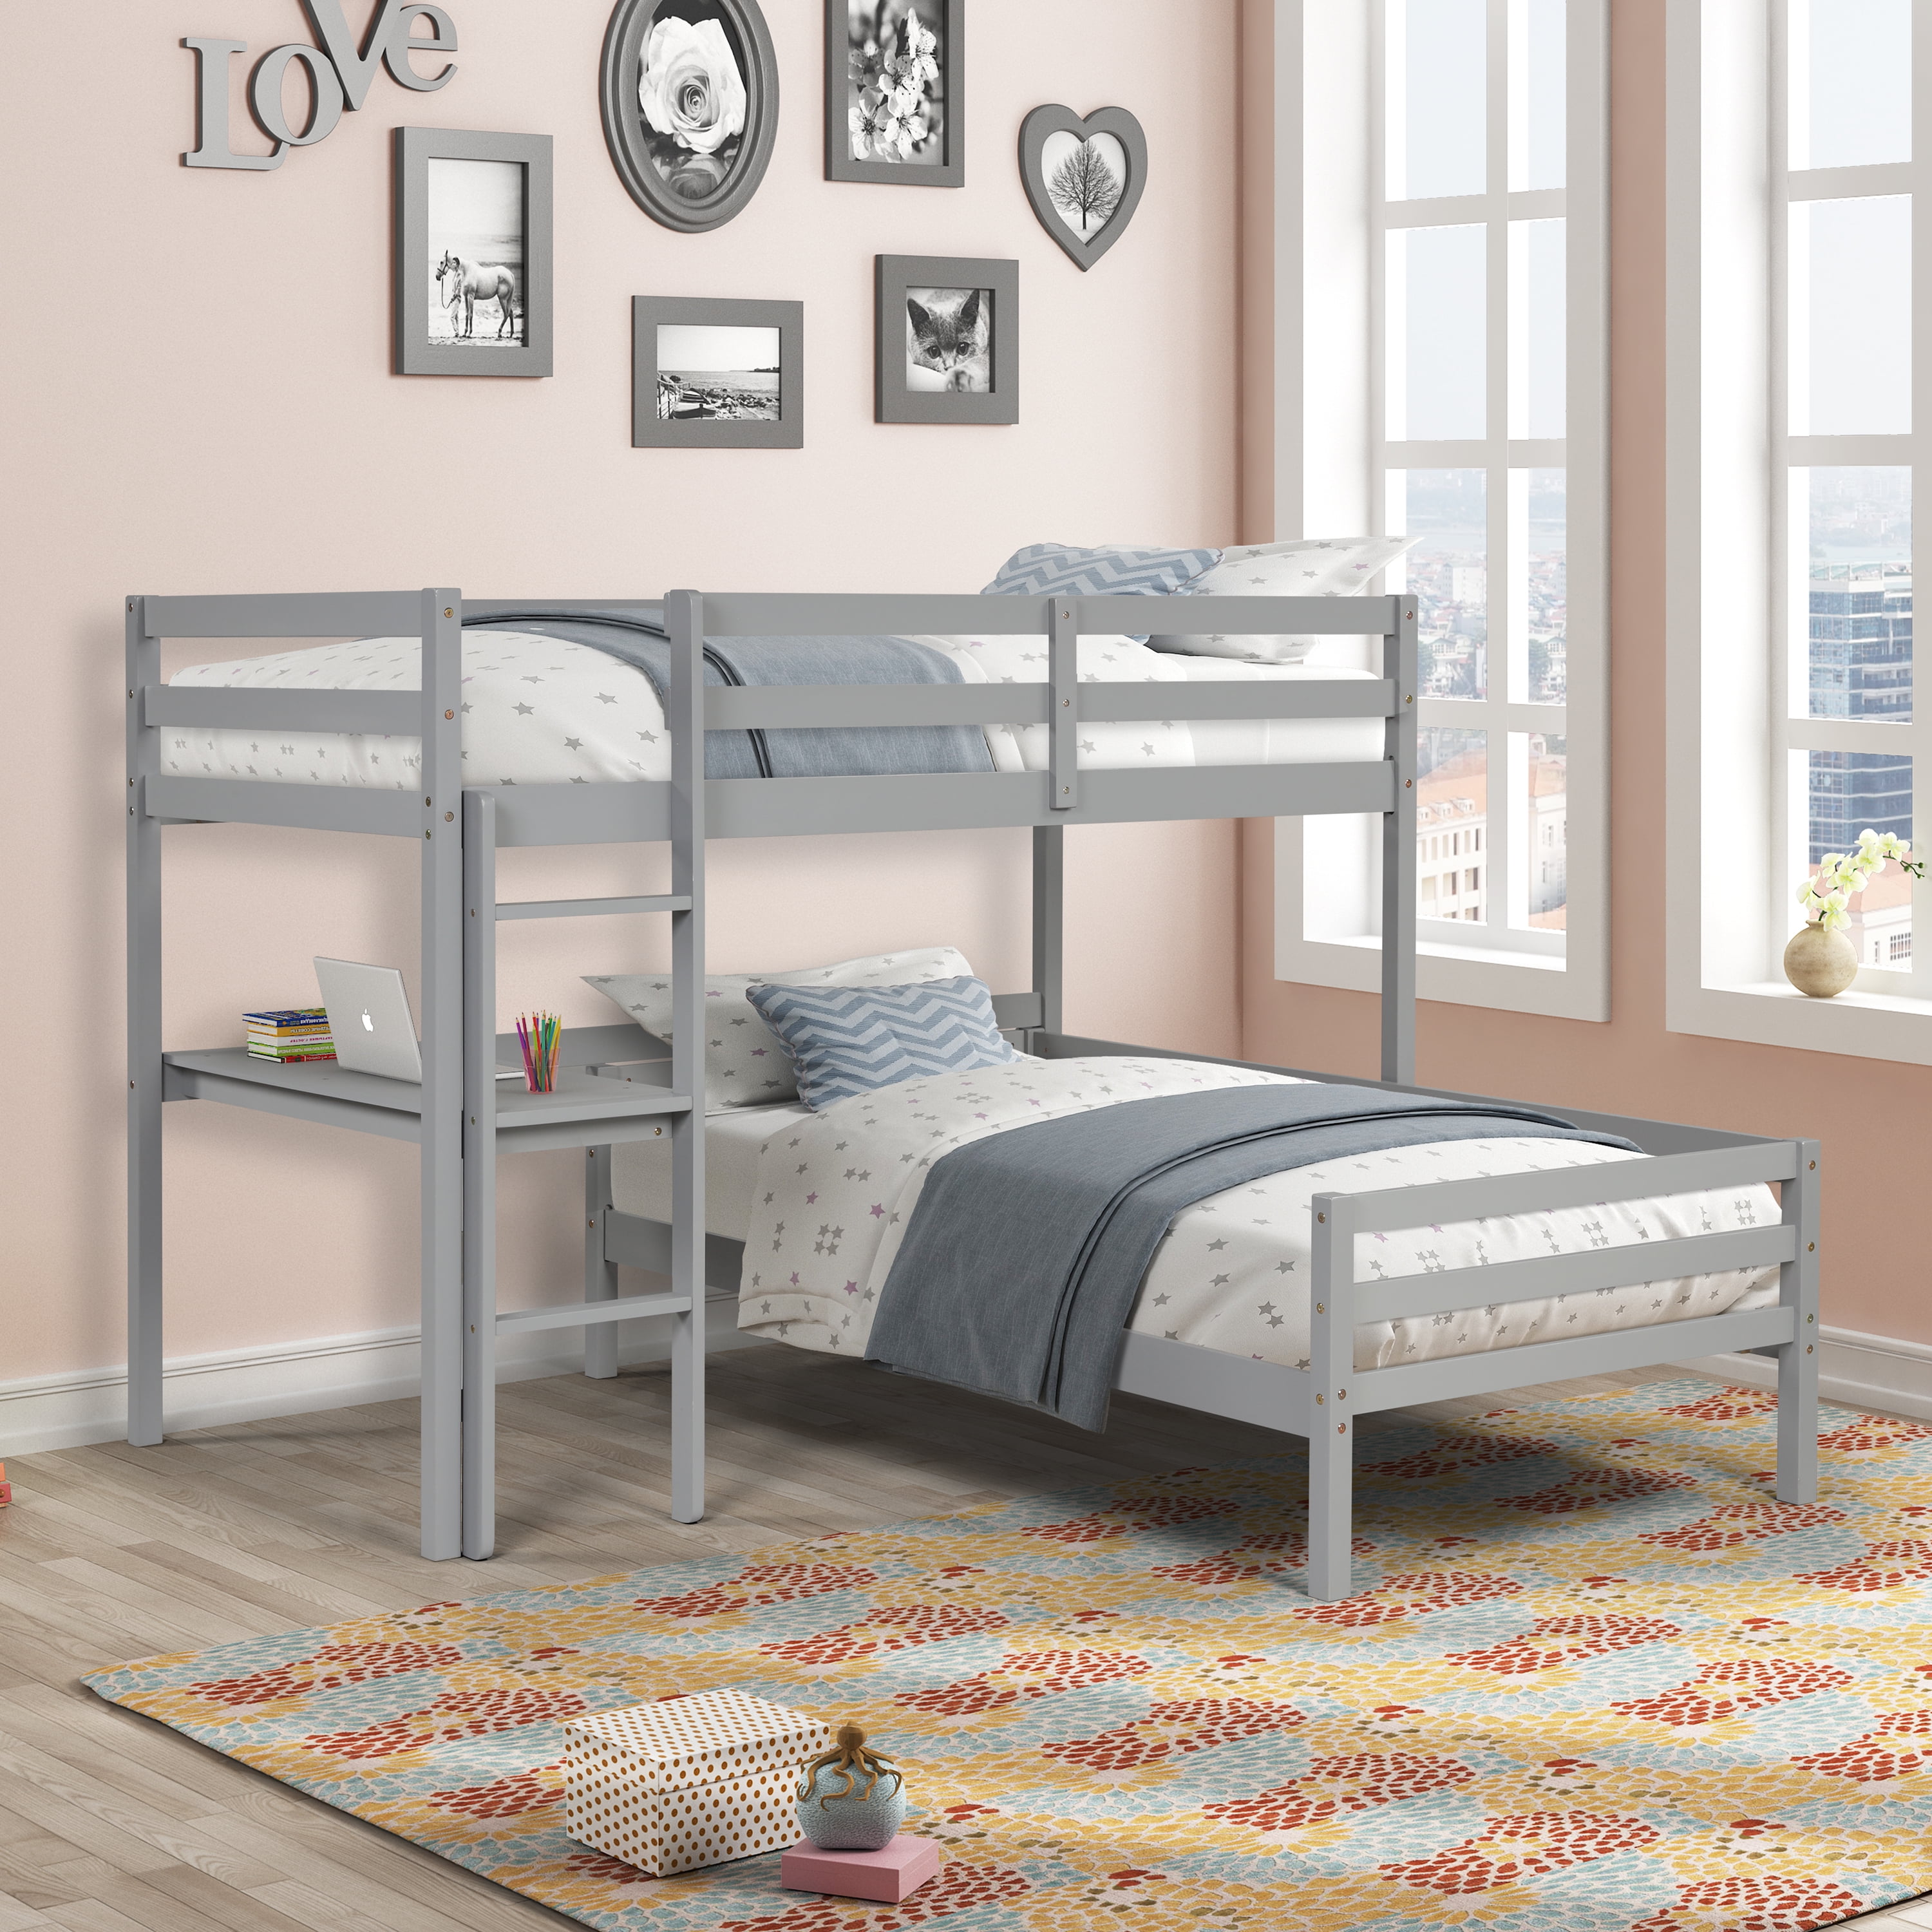 Twin Over Bunk Bed With Desk, One Bunk Bed